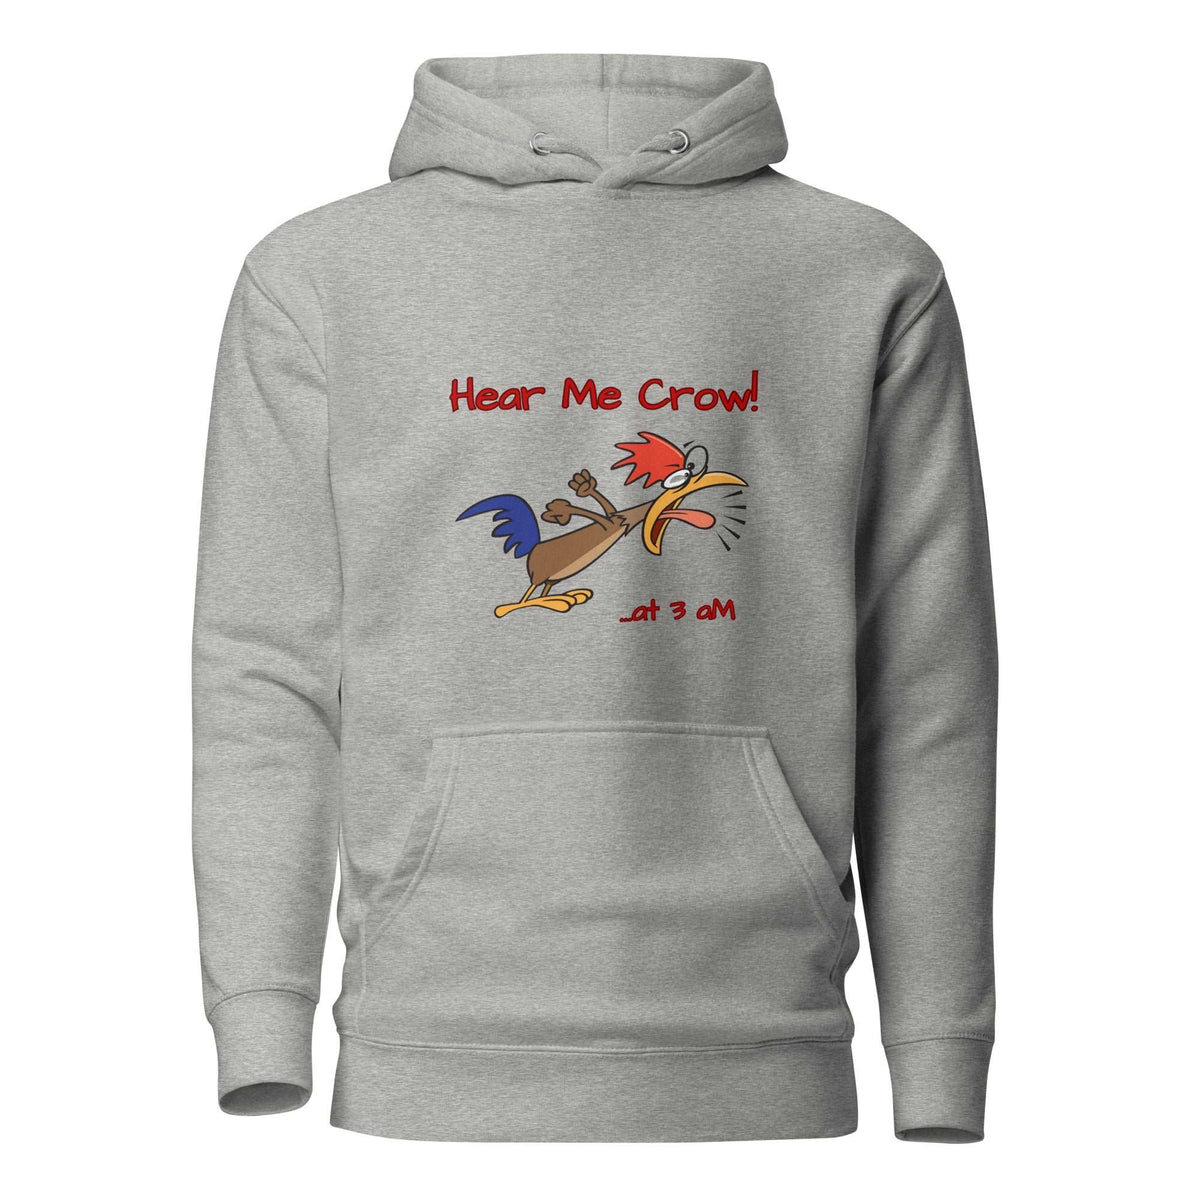 Unisex Hoodie - Cluck It All Farms